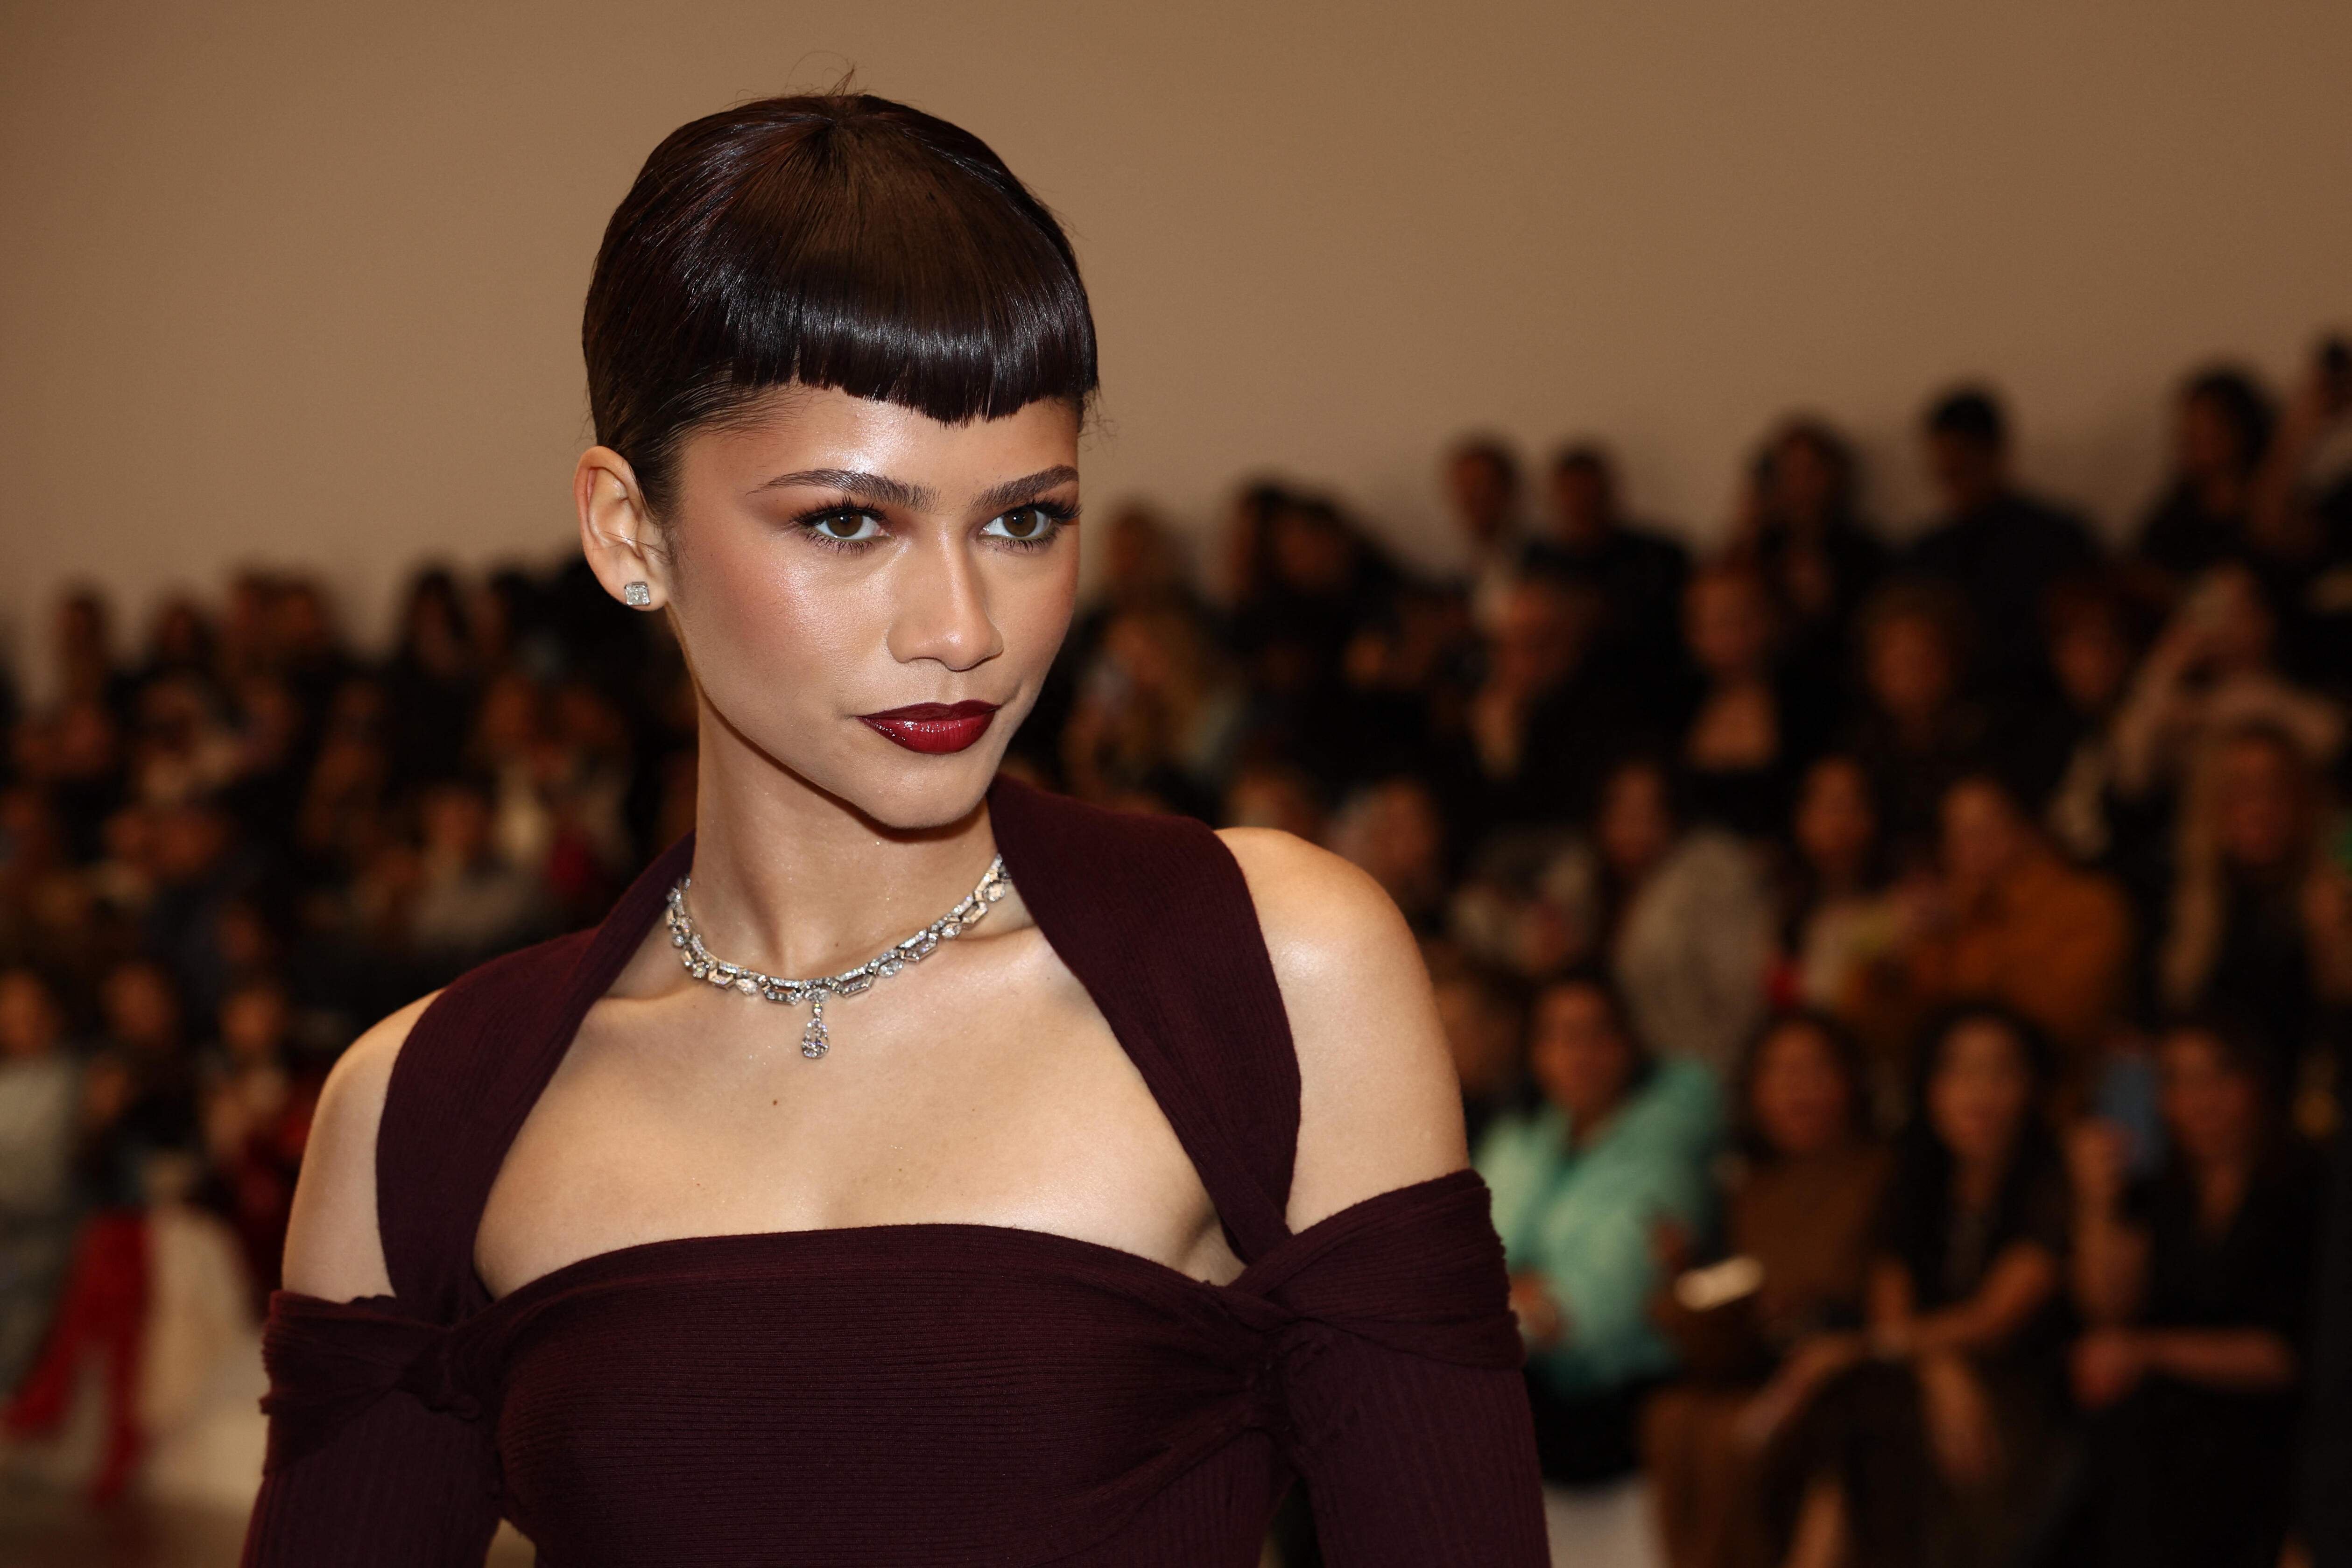 Zendaya Just Expressed Interest In Reviving This Iconic Movie Role | iHeart